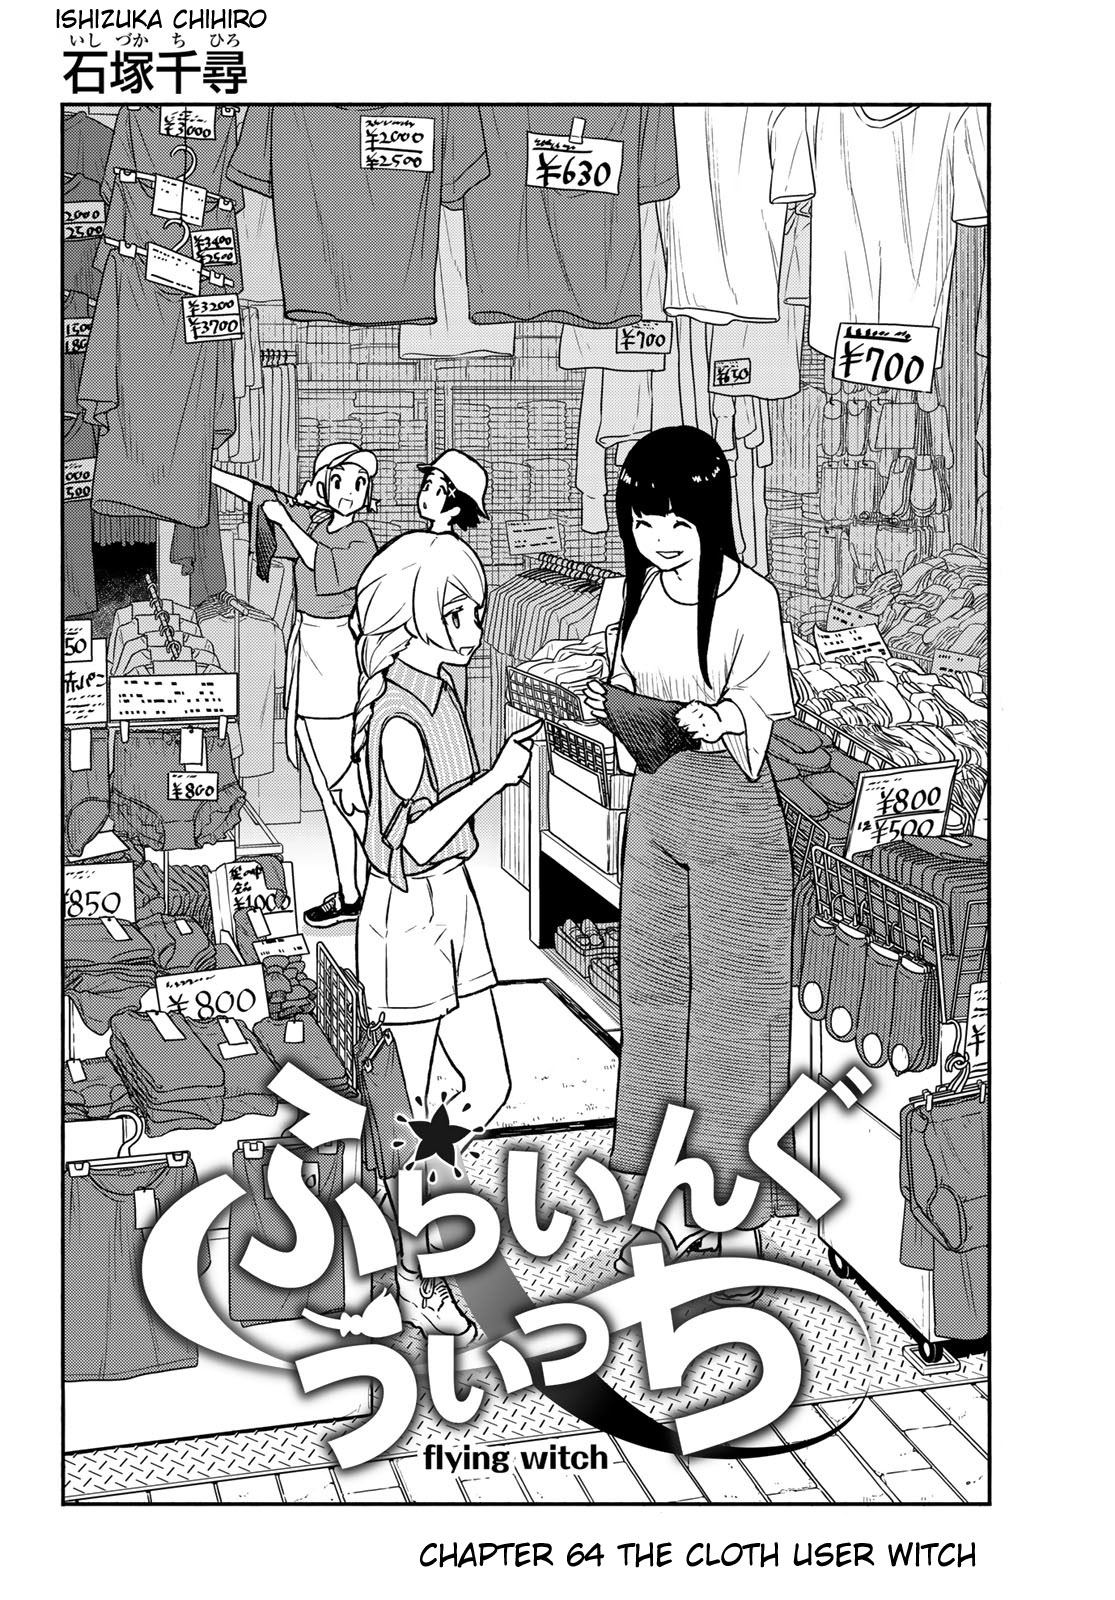 Flying Witch (Ishizuka Chihiro) Chapter 64: The Cloth User Witch - Picture 2